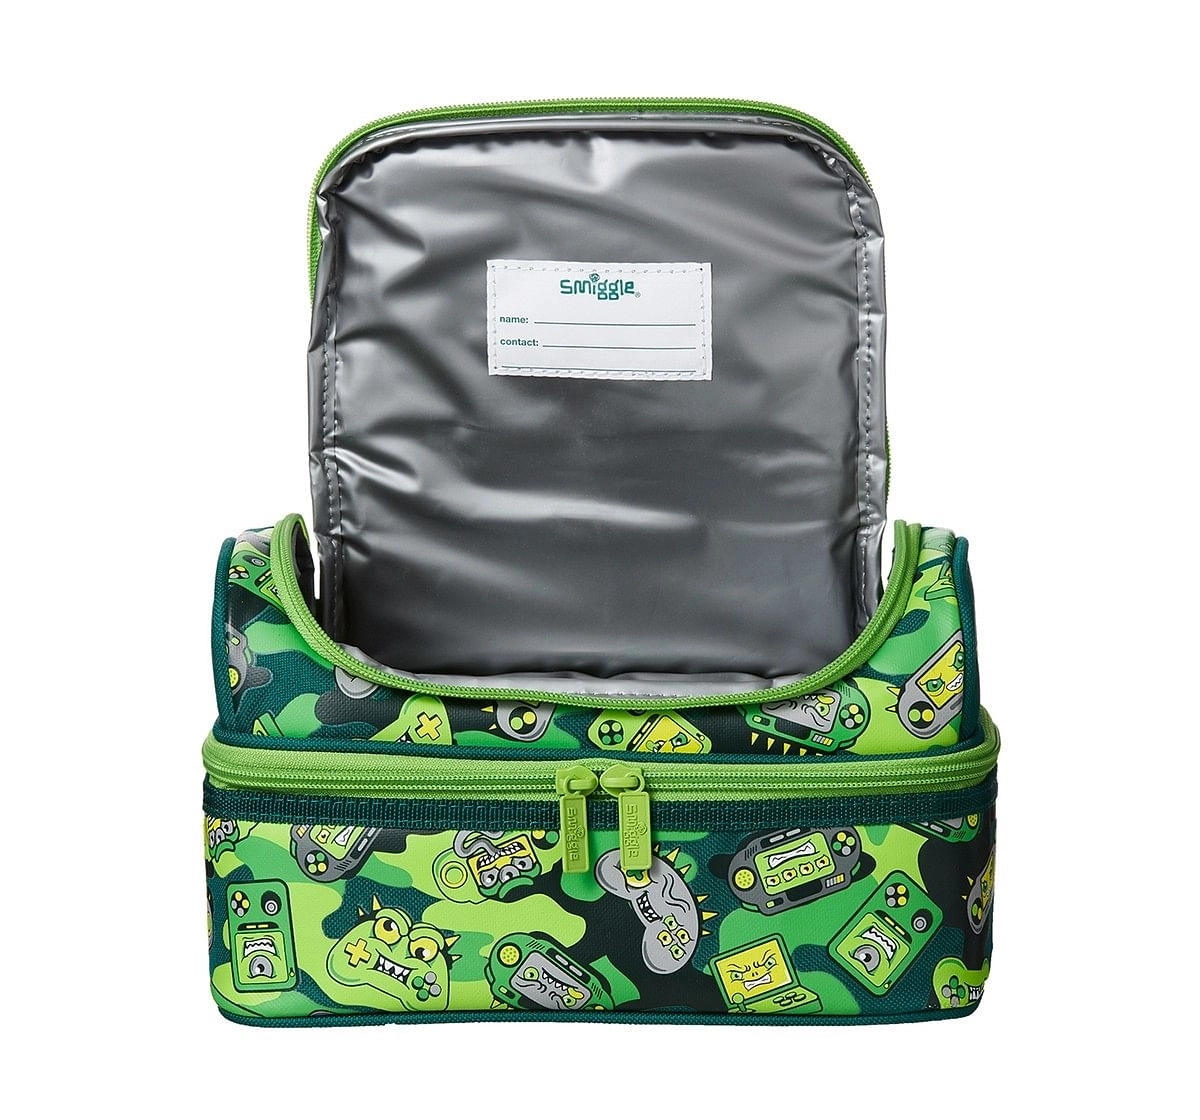 Smiggle Far Away Double Decker Lunchbox - Gaming Print Bags for Kids age 3Y+ (Green)